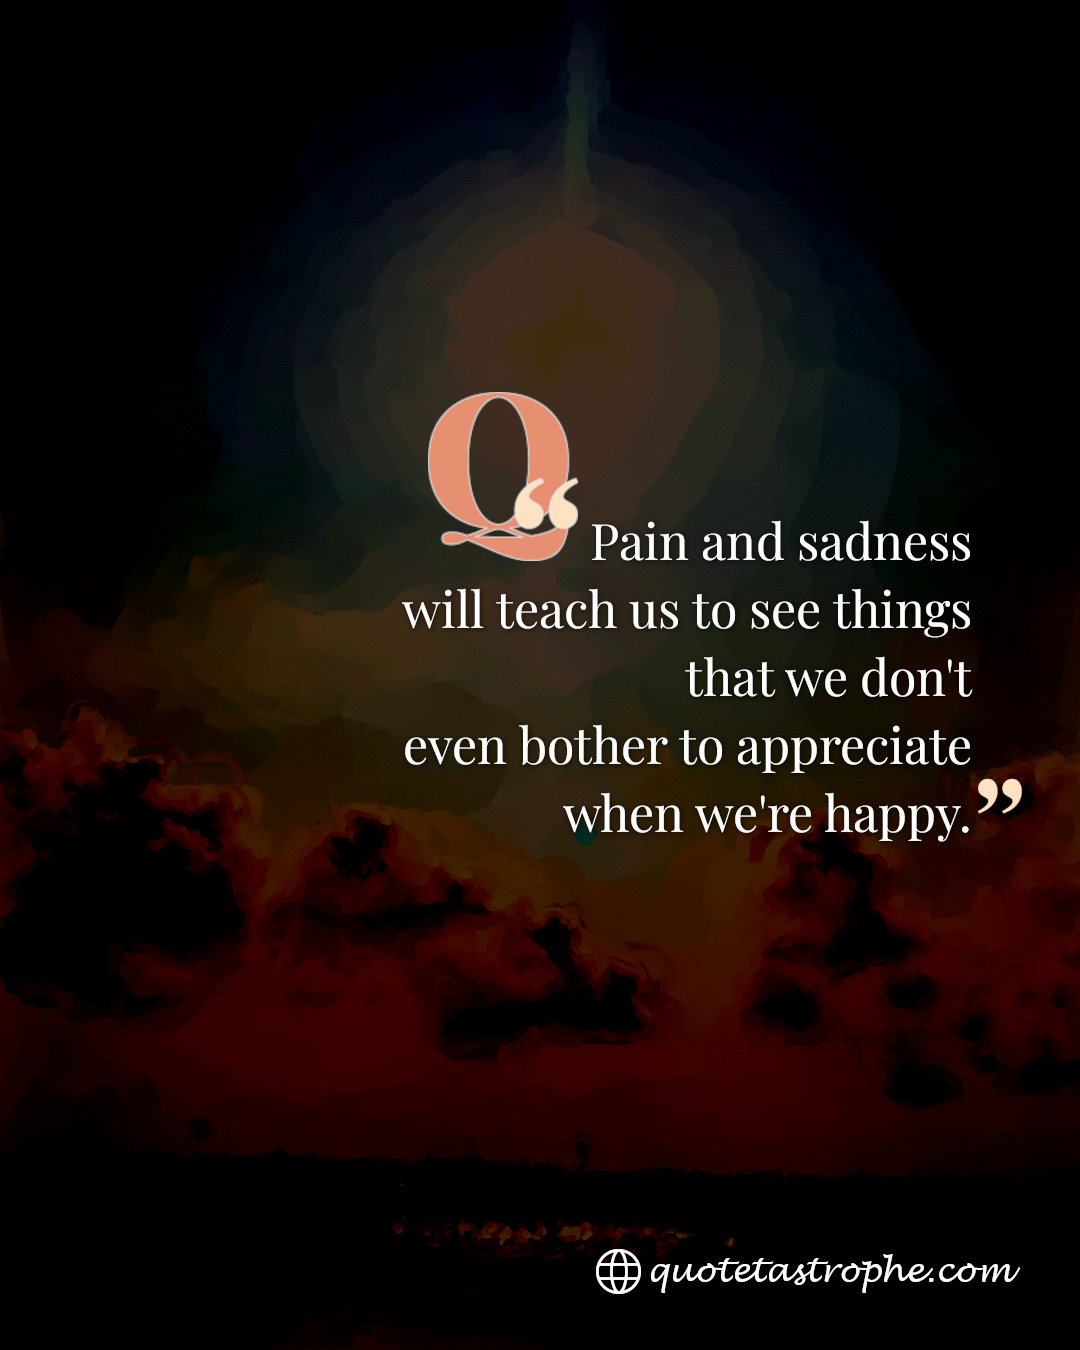 Pain & Sadness Teaches Us To See What We Don't Appreciate